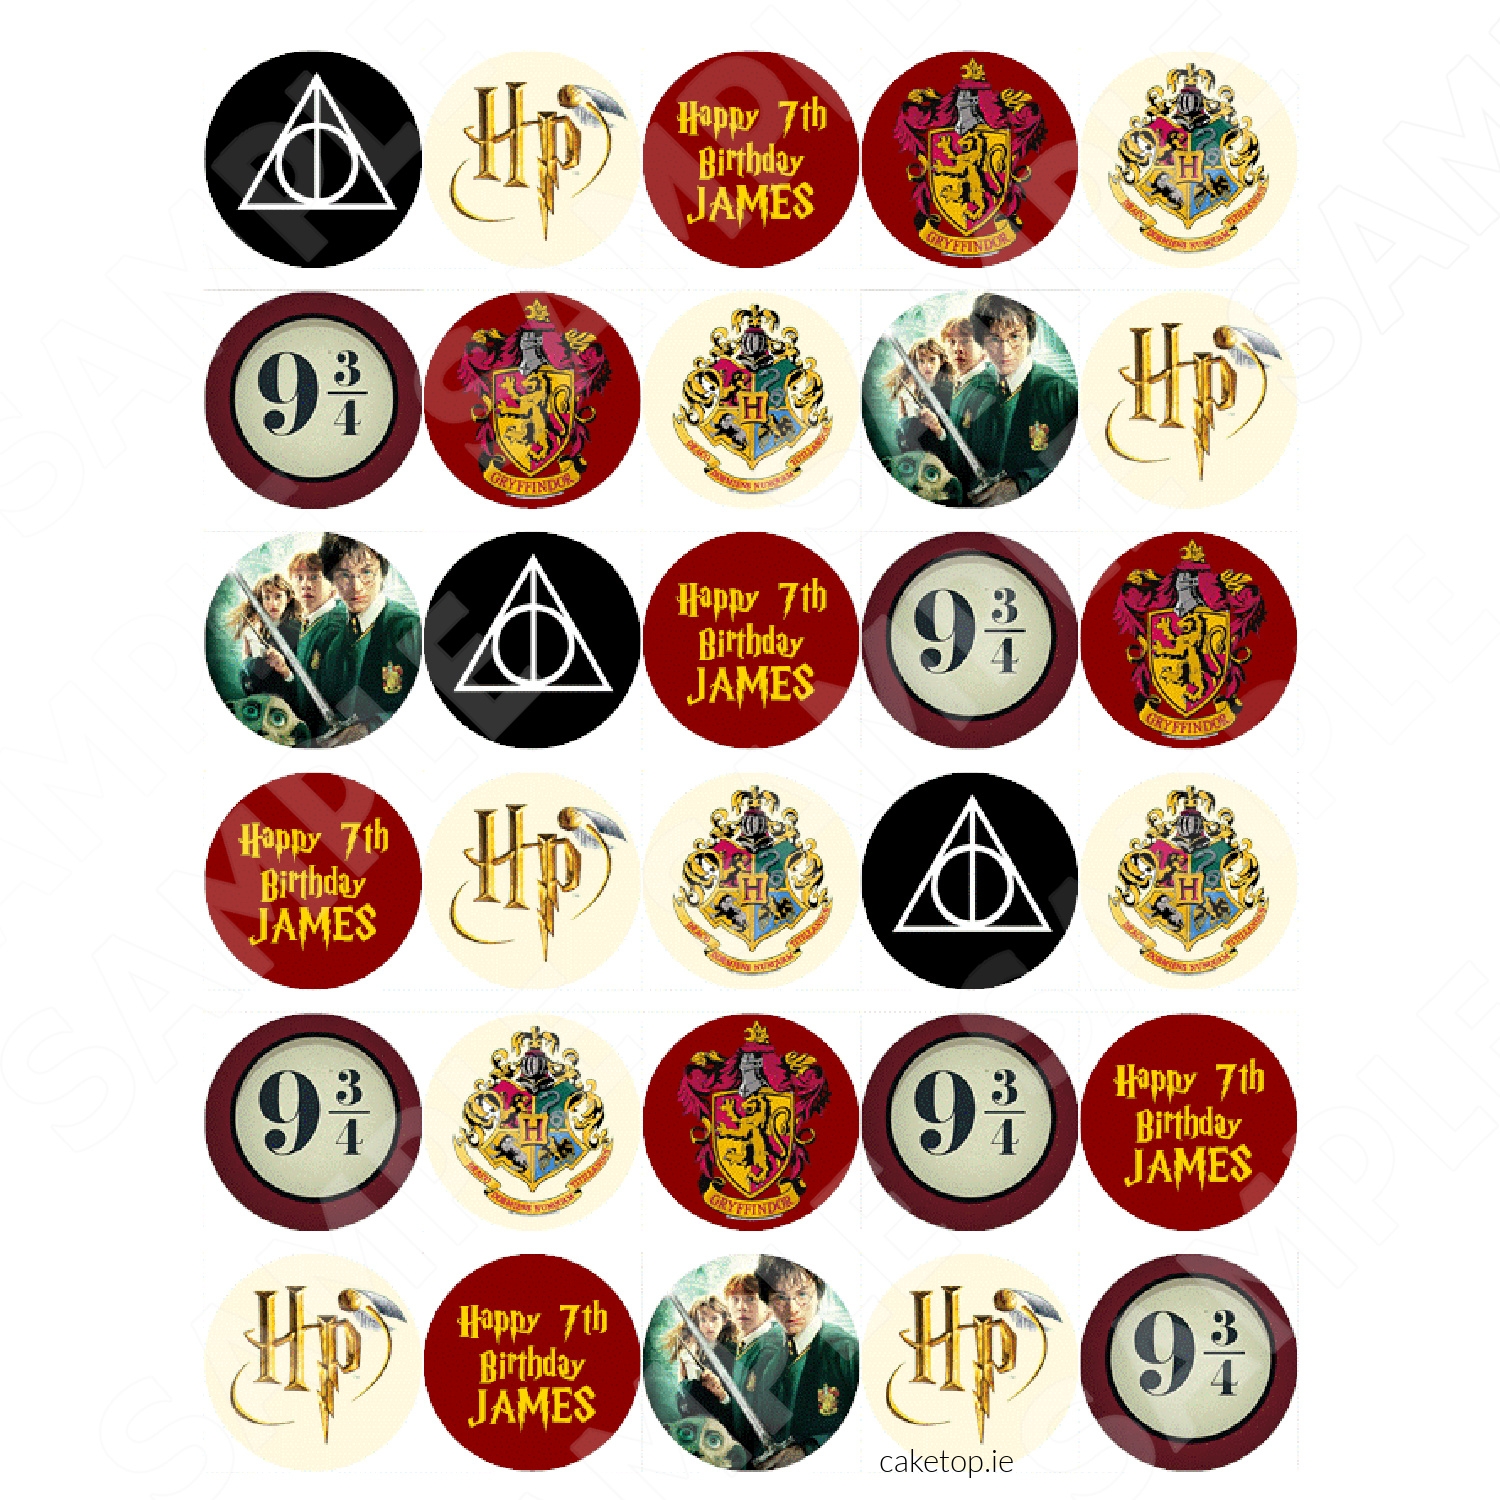 Edible Cake Toppers Edible Picture Caketop ie Harry Potter